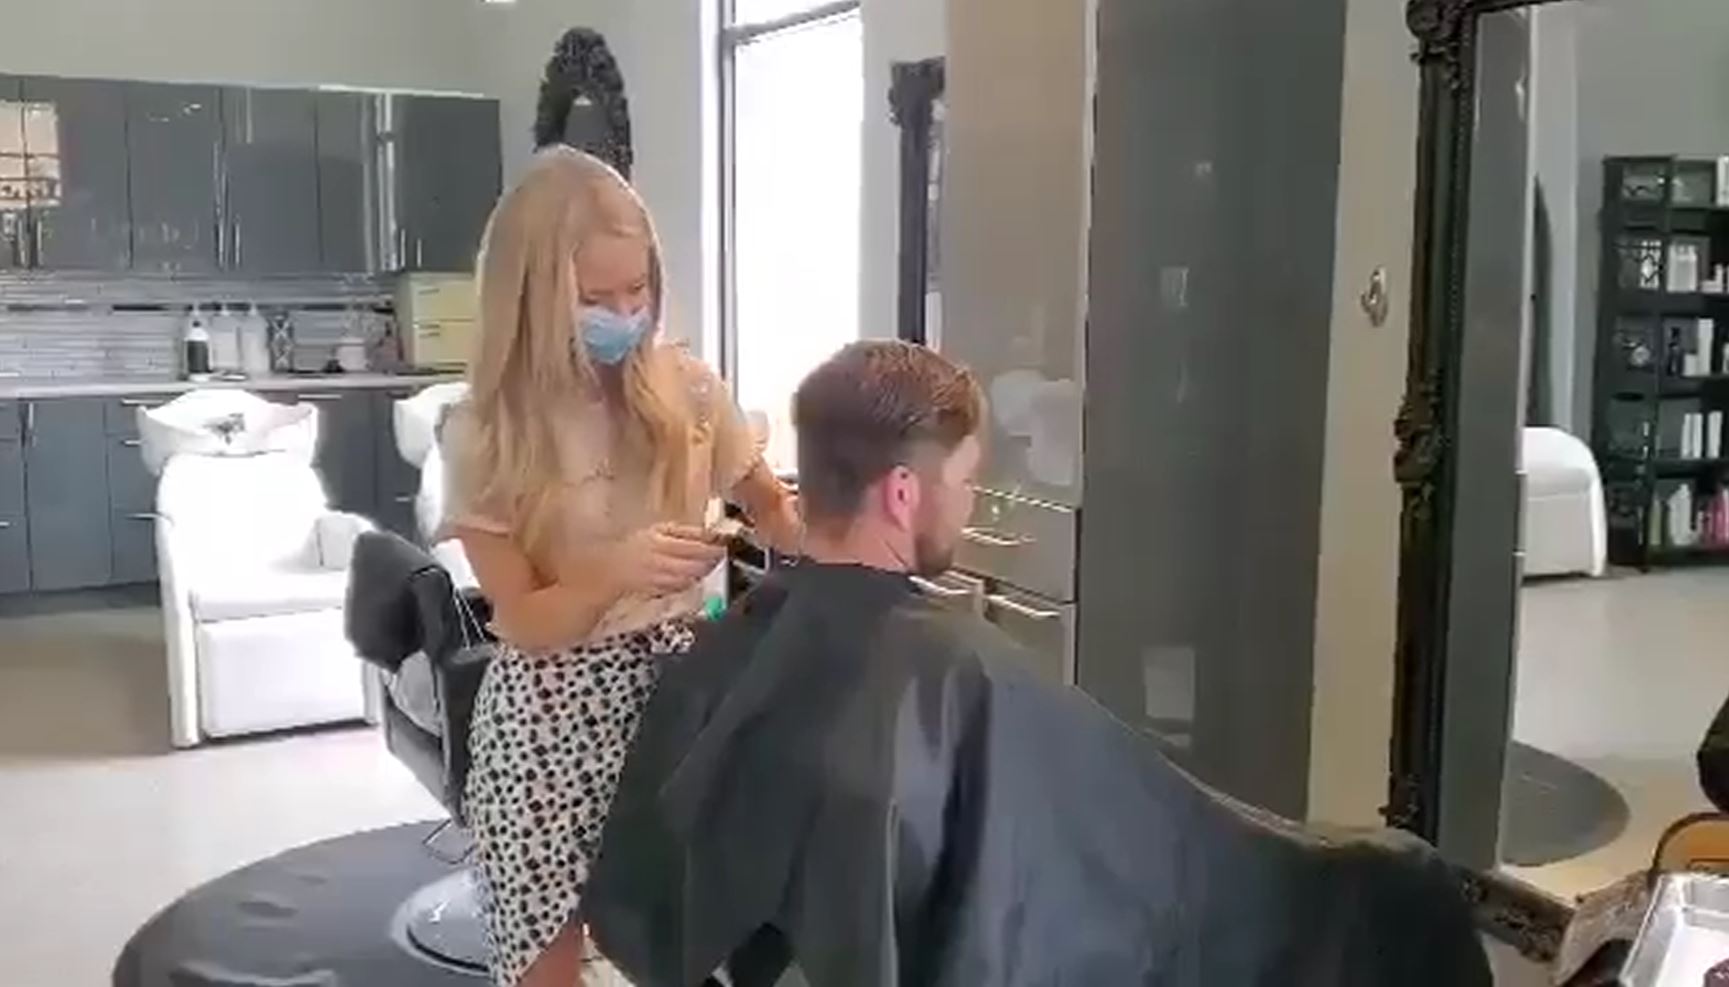 Hair salons reopen in Montana